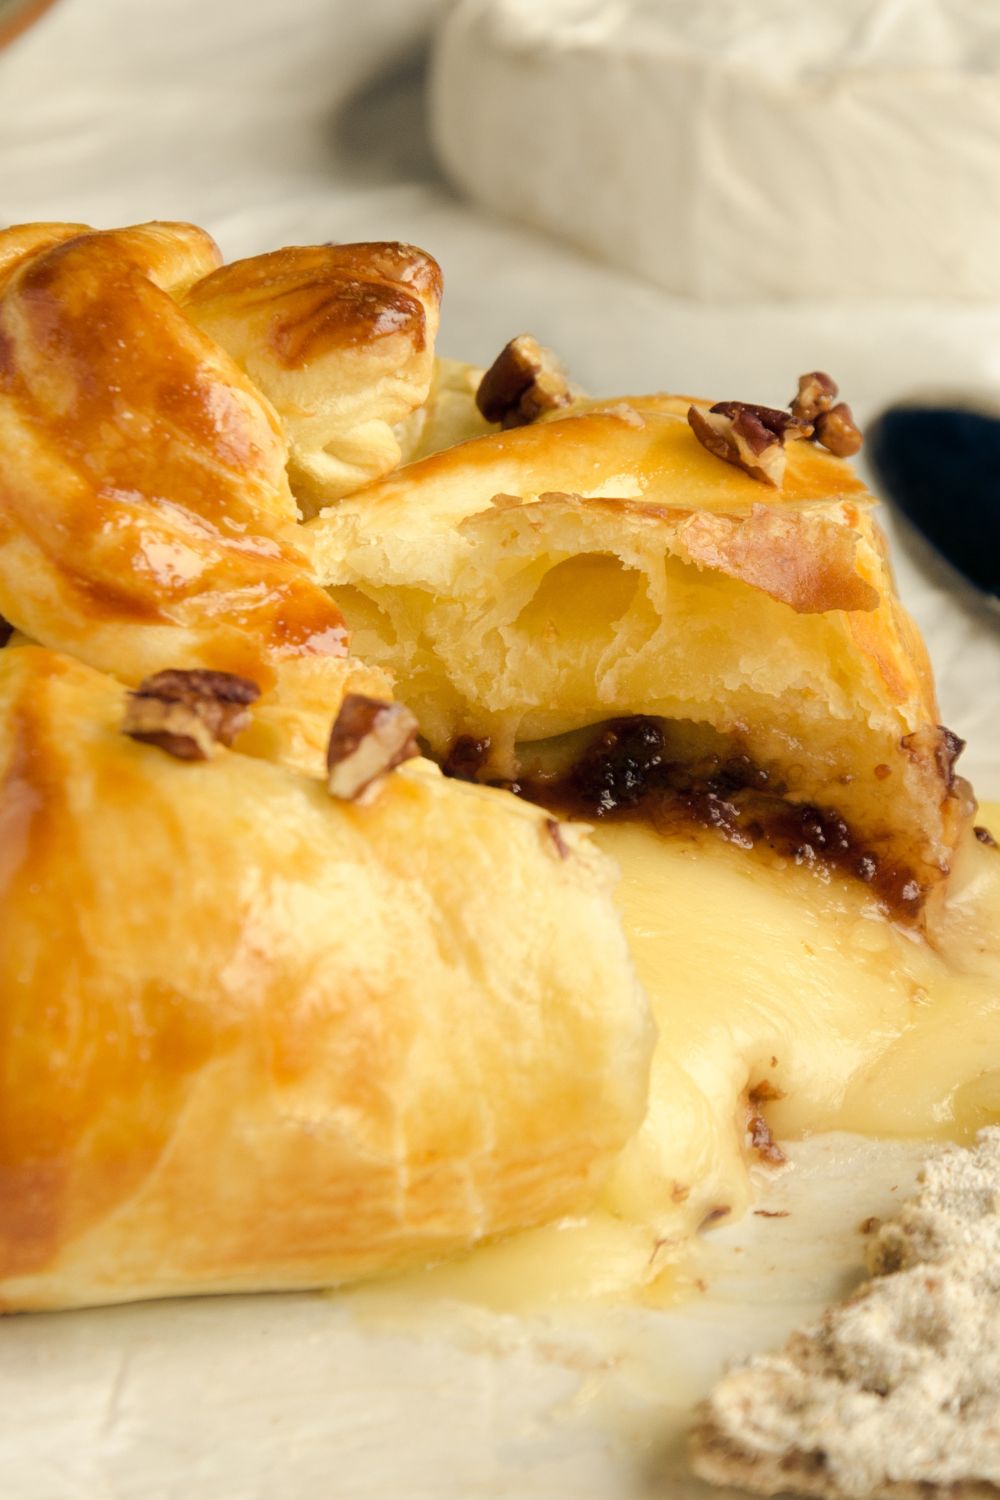 A golden wheel of baked Brie en croute filled with raspberry preserves and nuts.